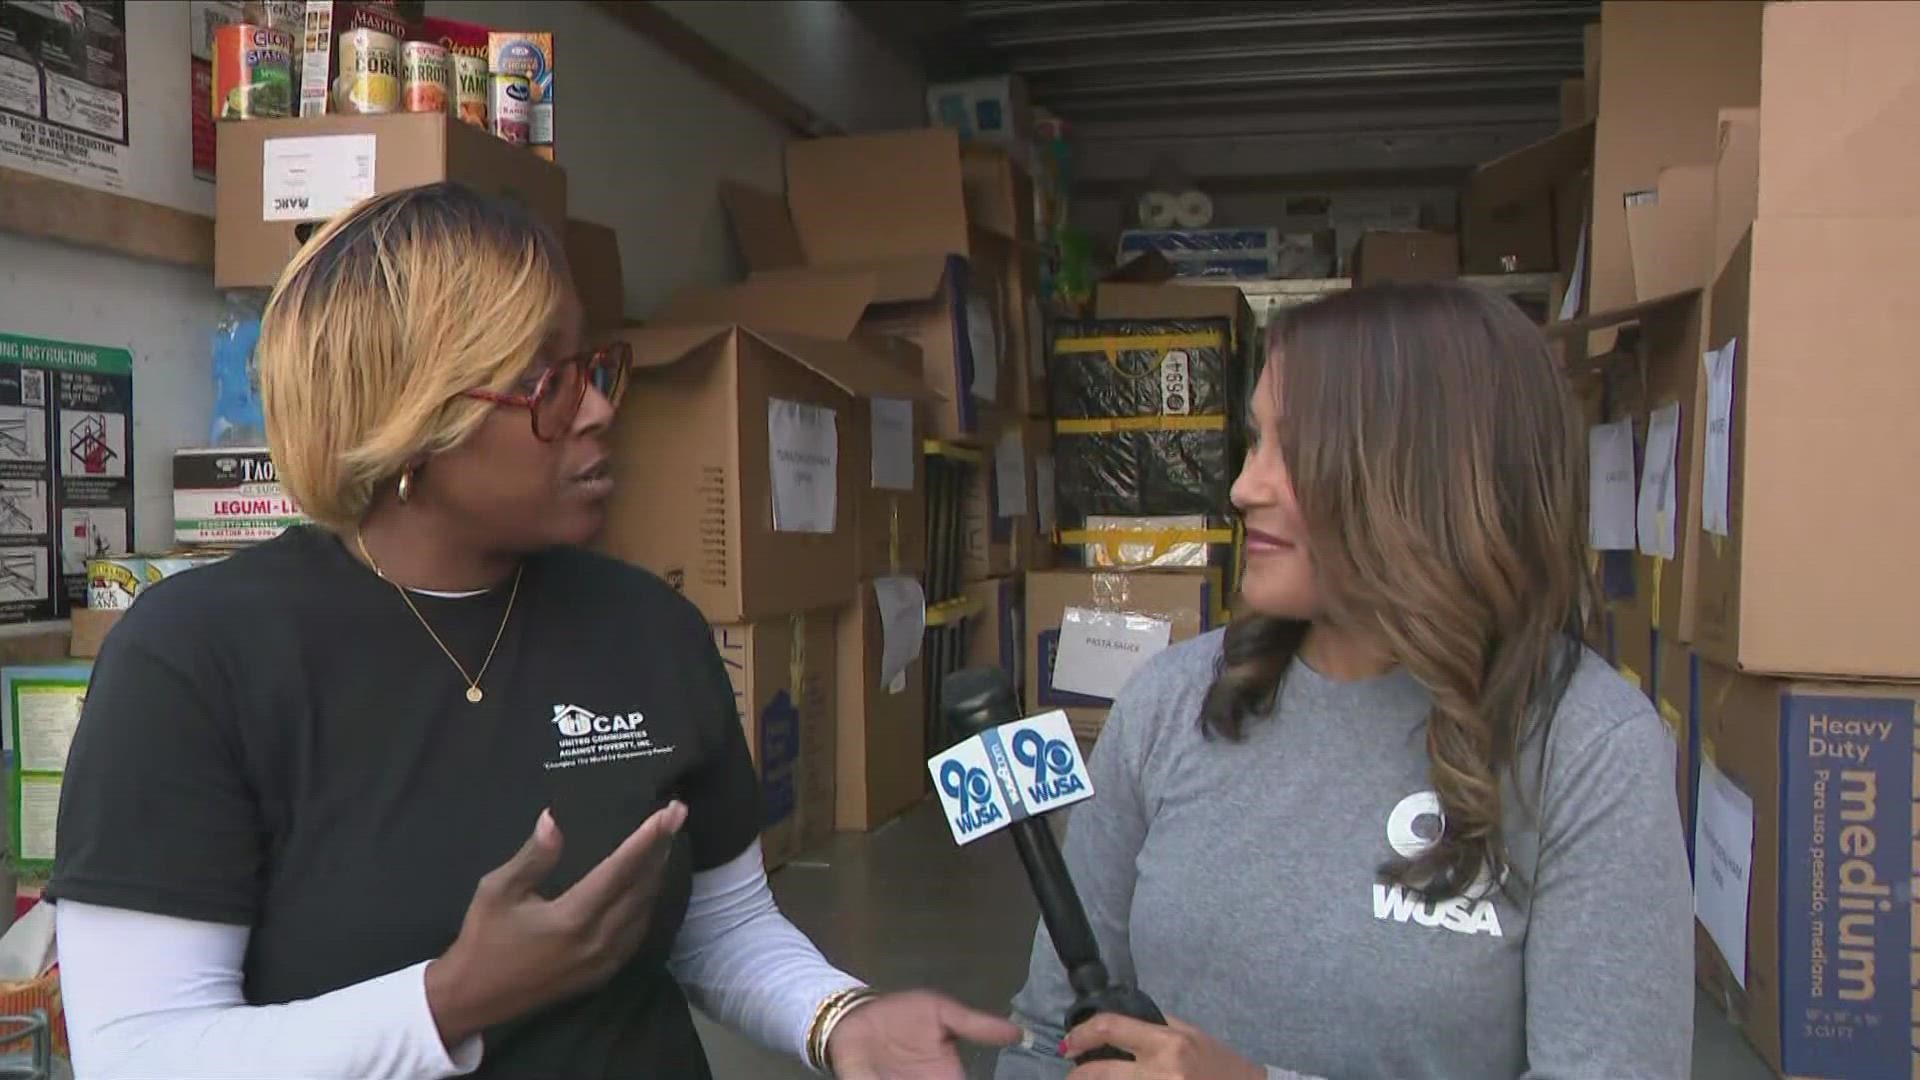 Over this summer, WUSA9 partnered with eight organizations and collected over 16,000 pounds of food for people across the DMV.